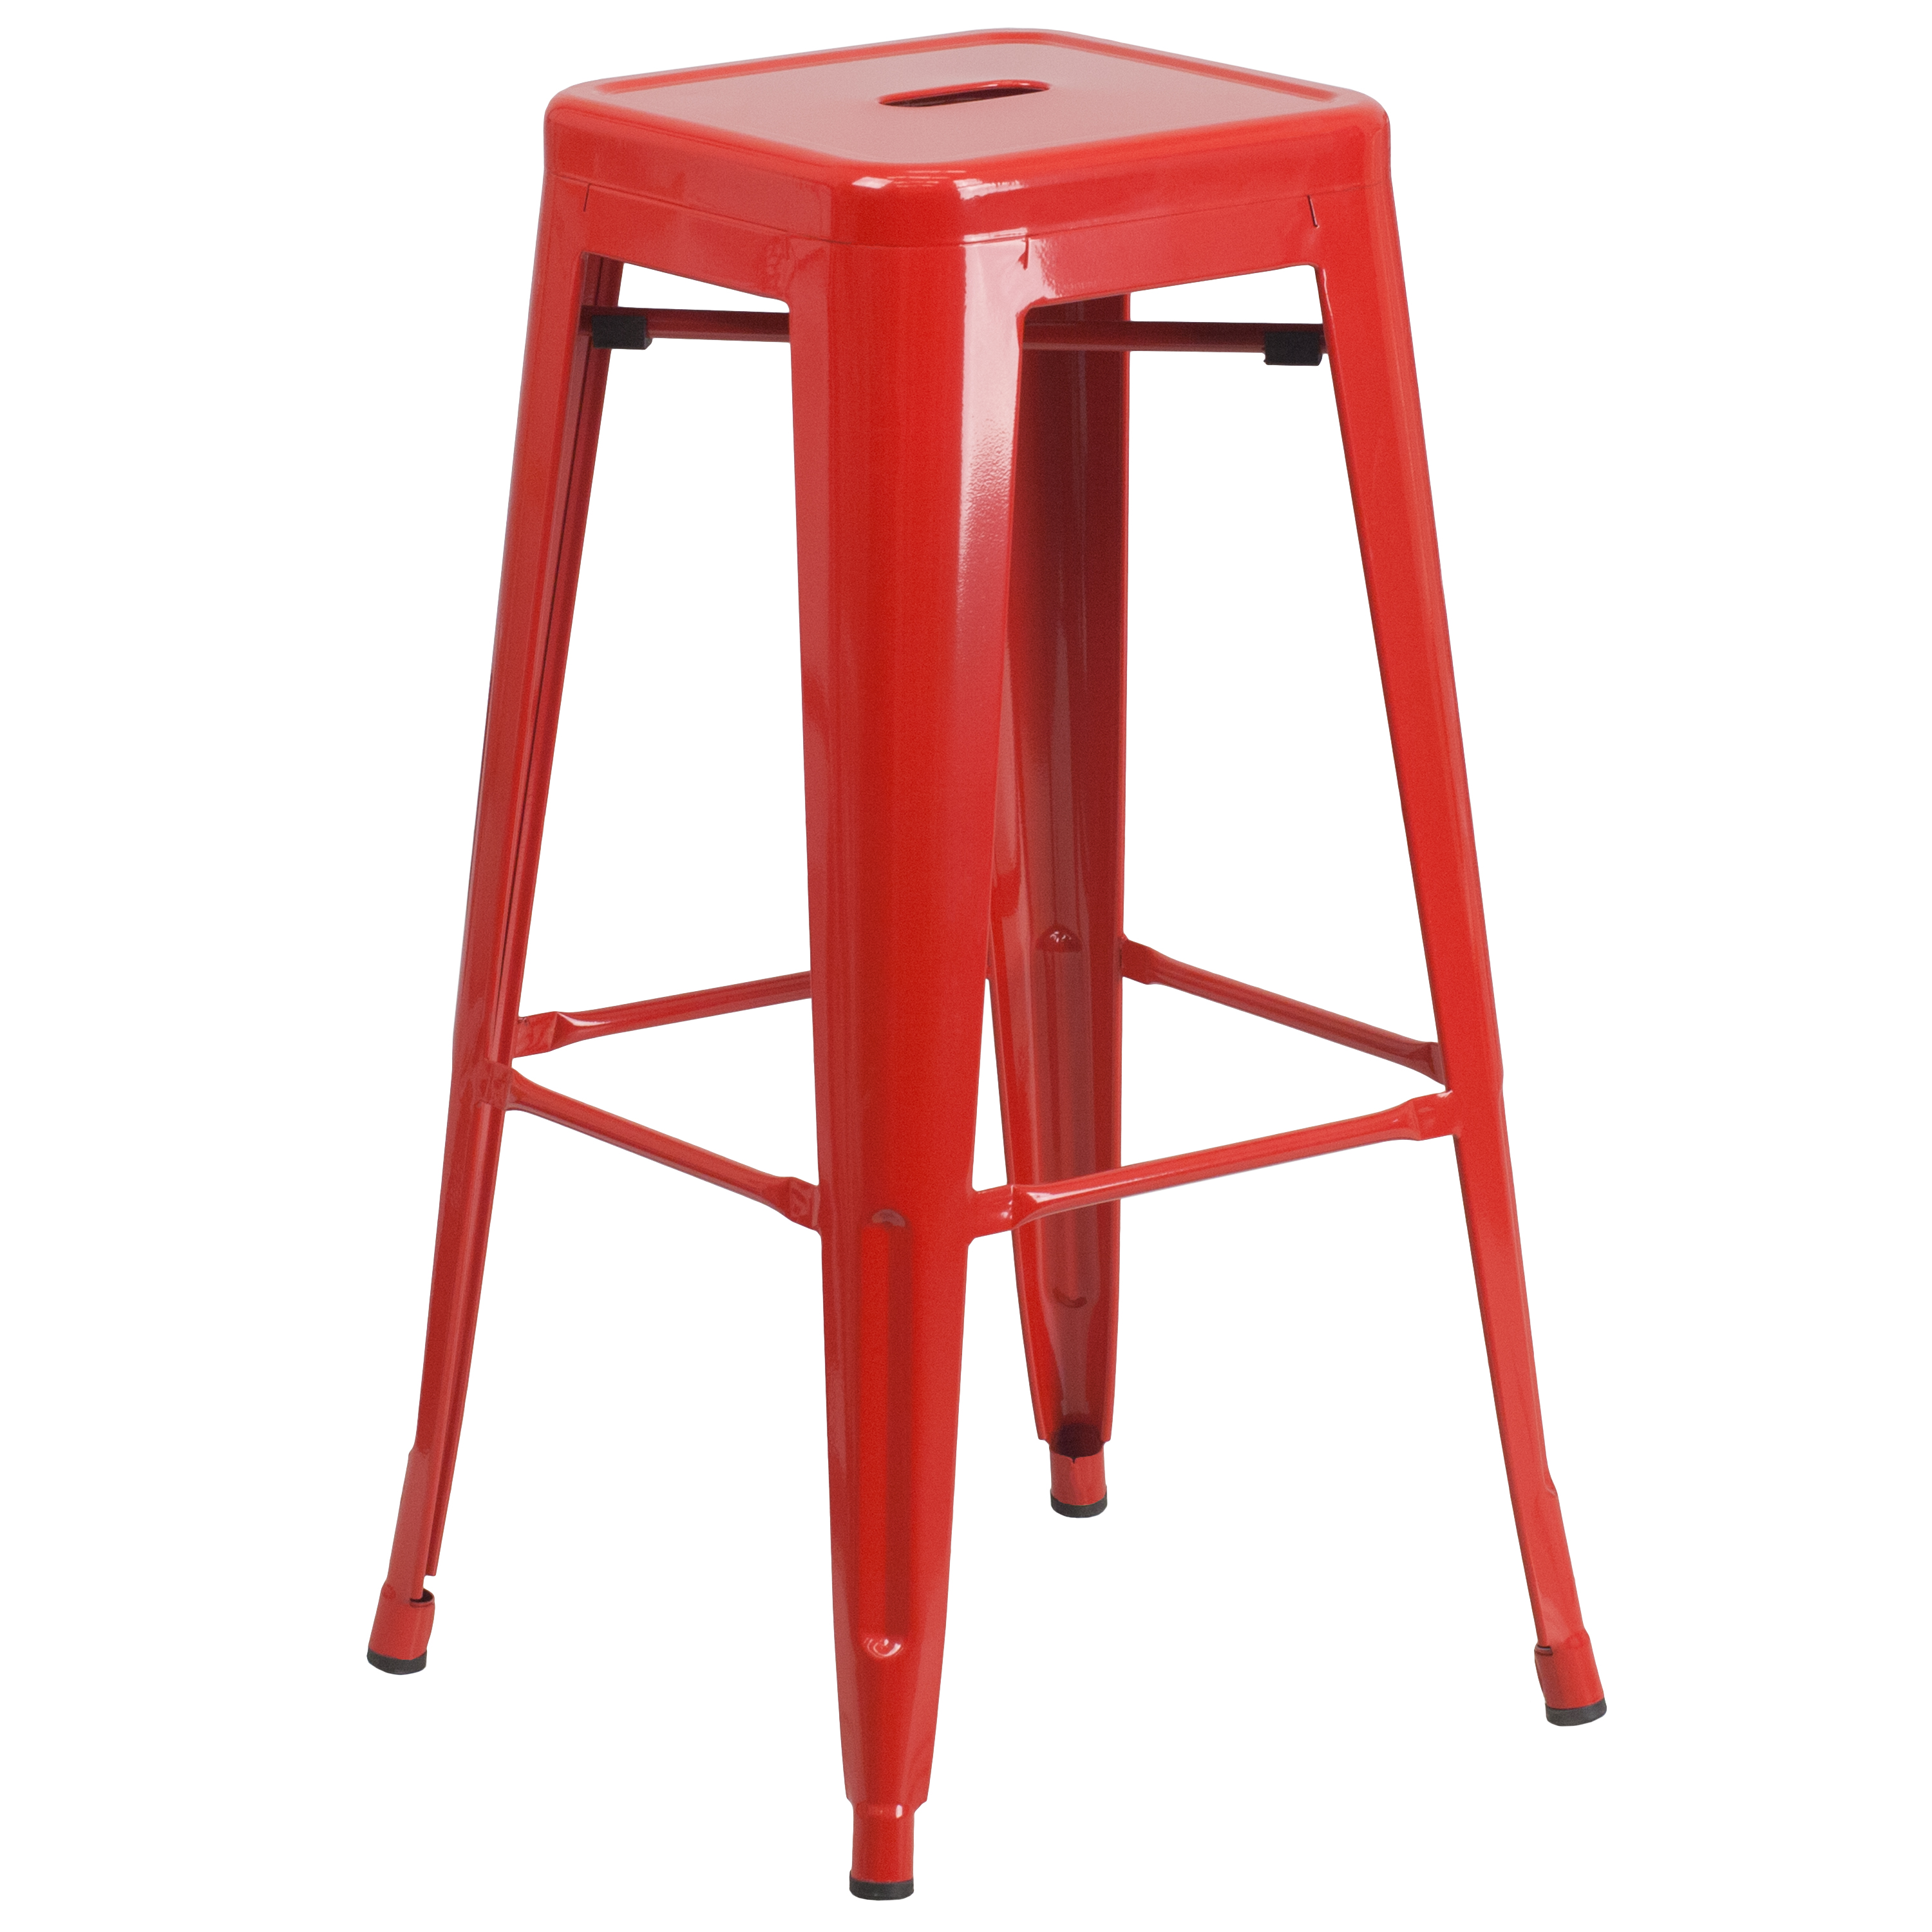 Flash Furniture Commercial Grade 23.75" Square Red Metal Indoor-Outdoor Bar Table Set with 2 Square Seat Backless Stools - image 5 of 5